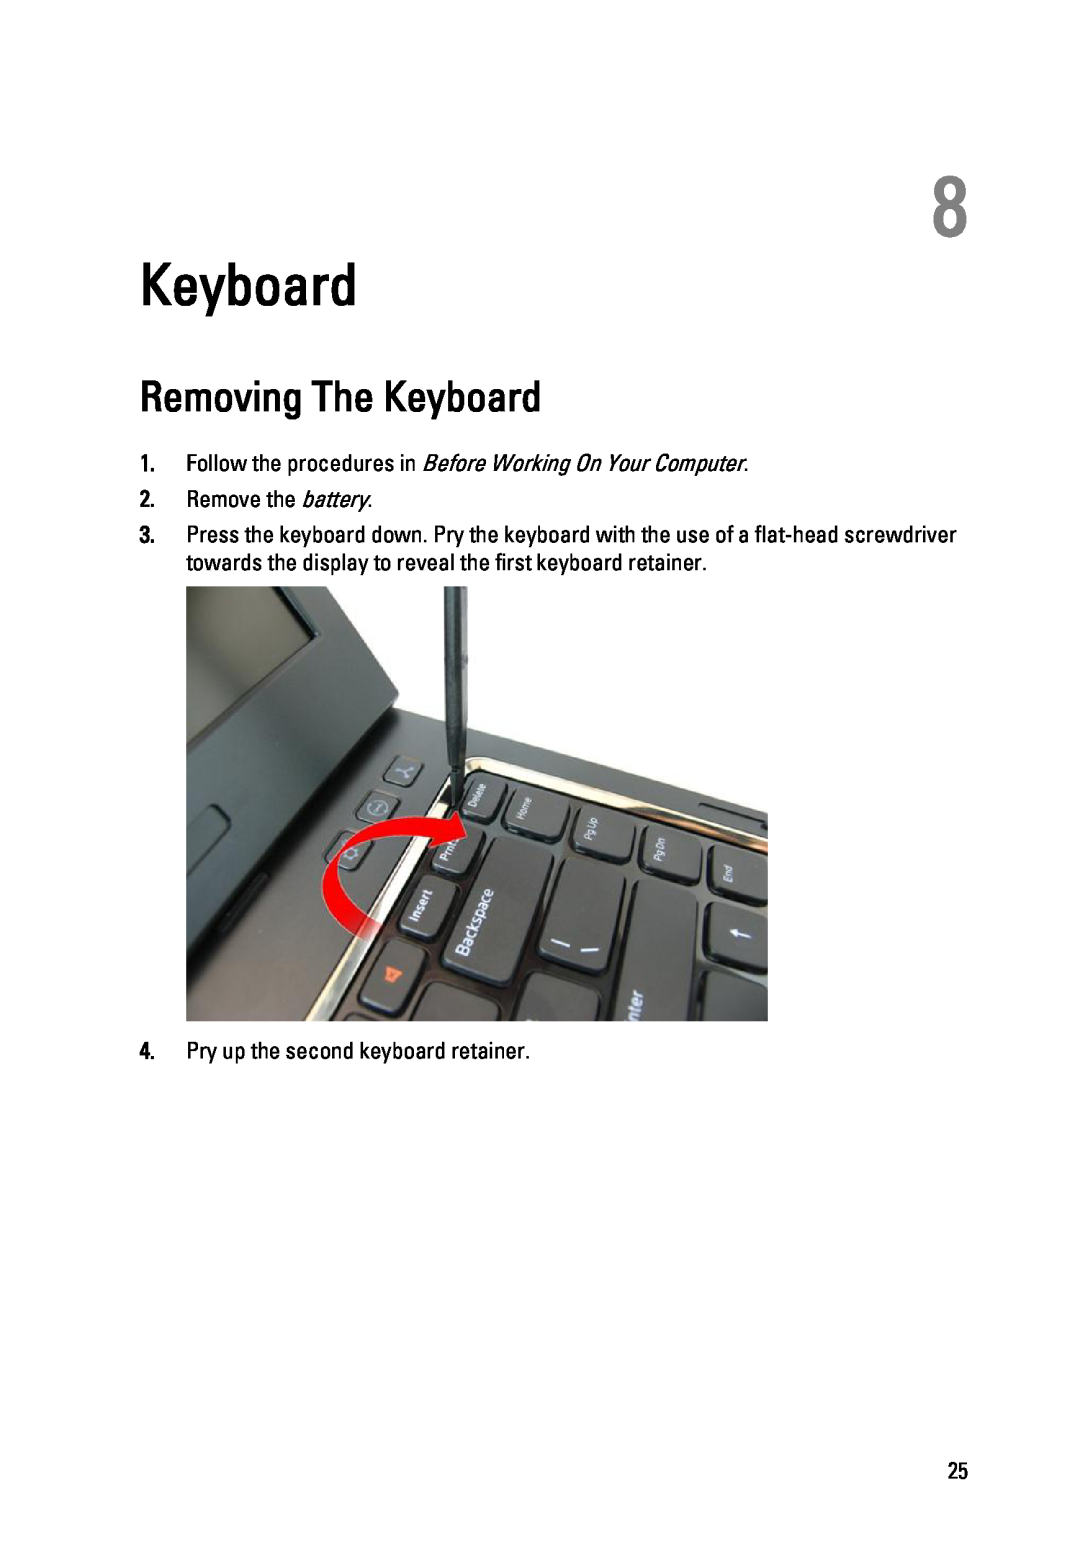 Dell 3450 owner manual Removing The Keyboard, Remove the battery, Pry up the second keyboard retainer 